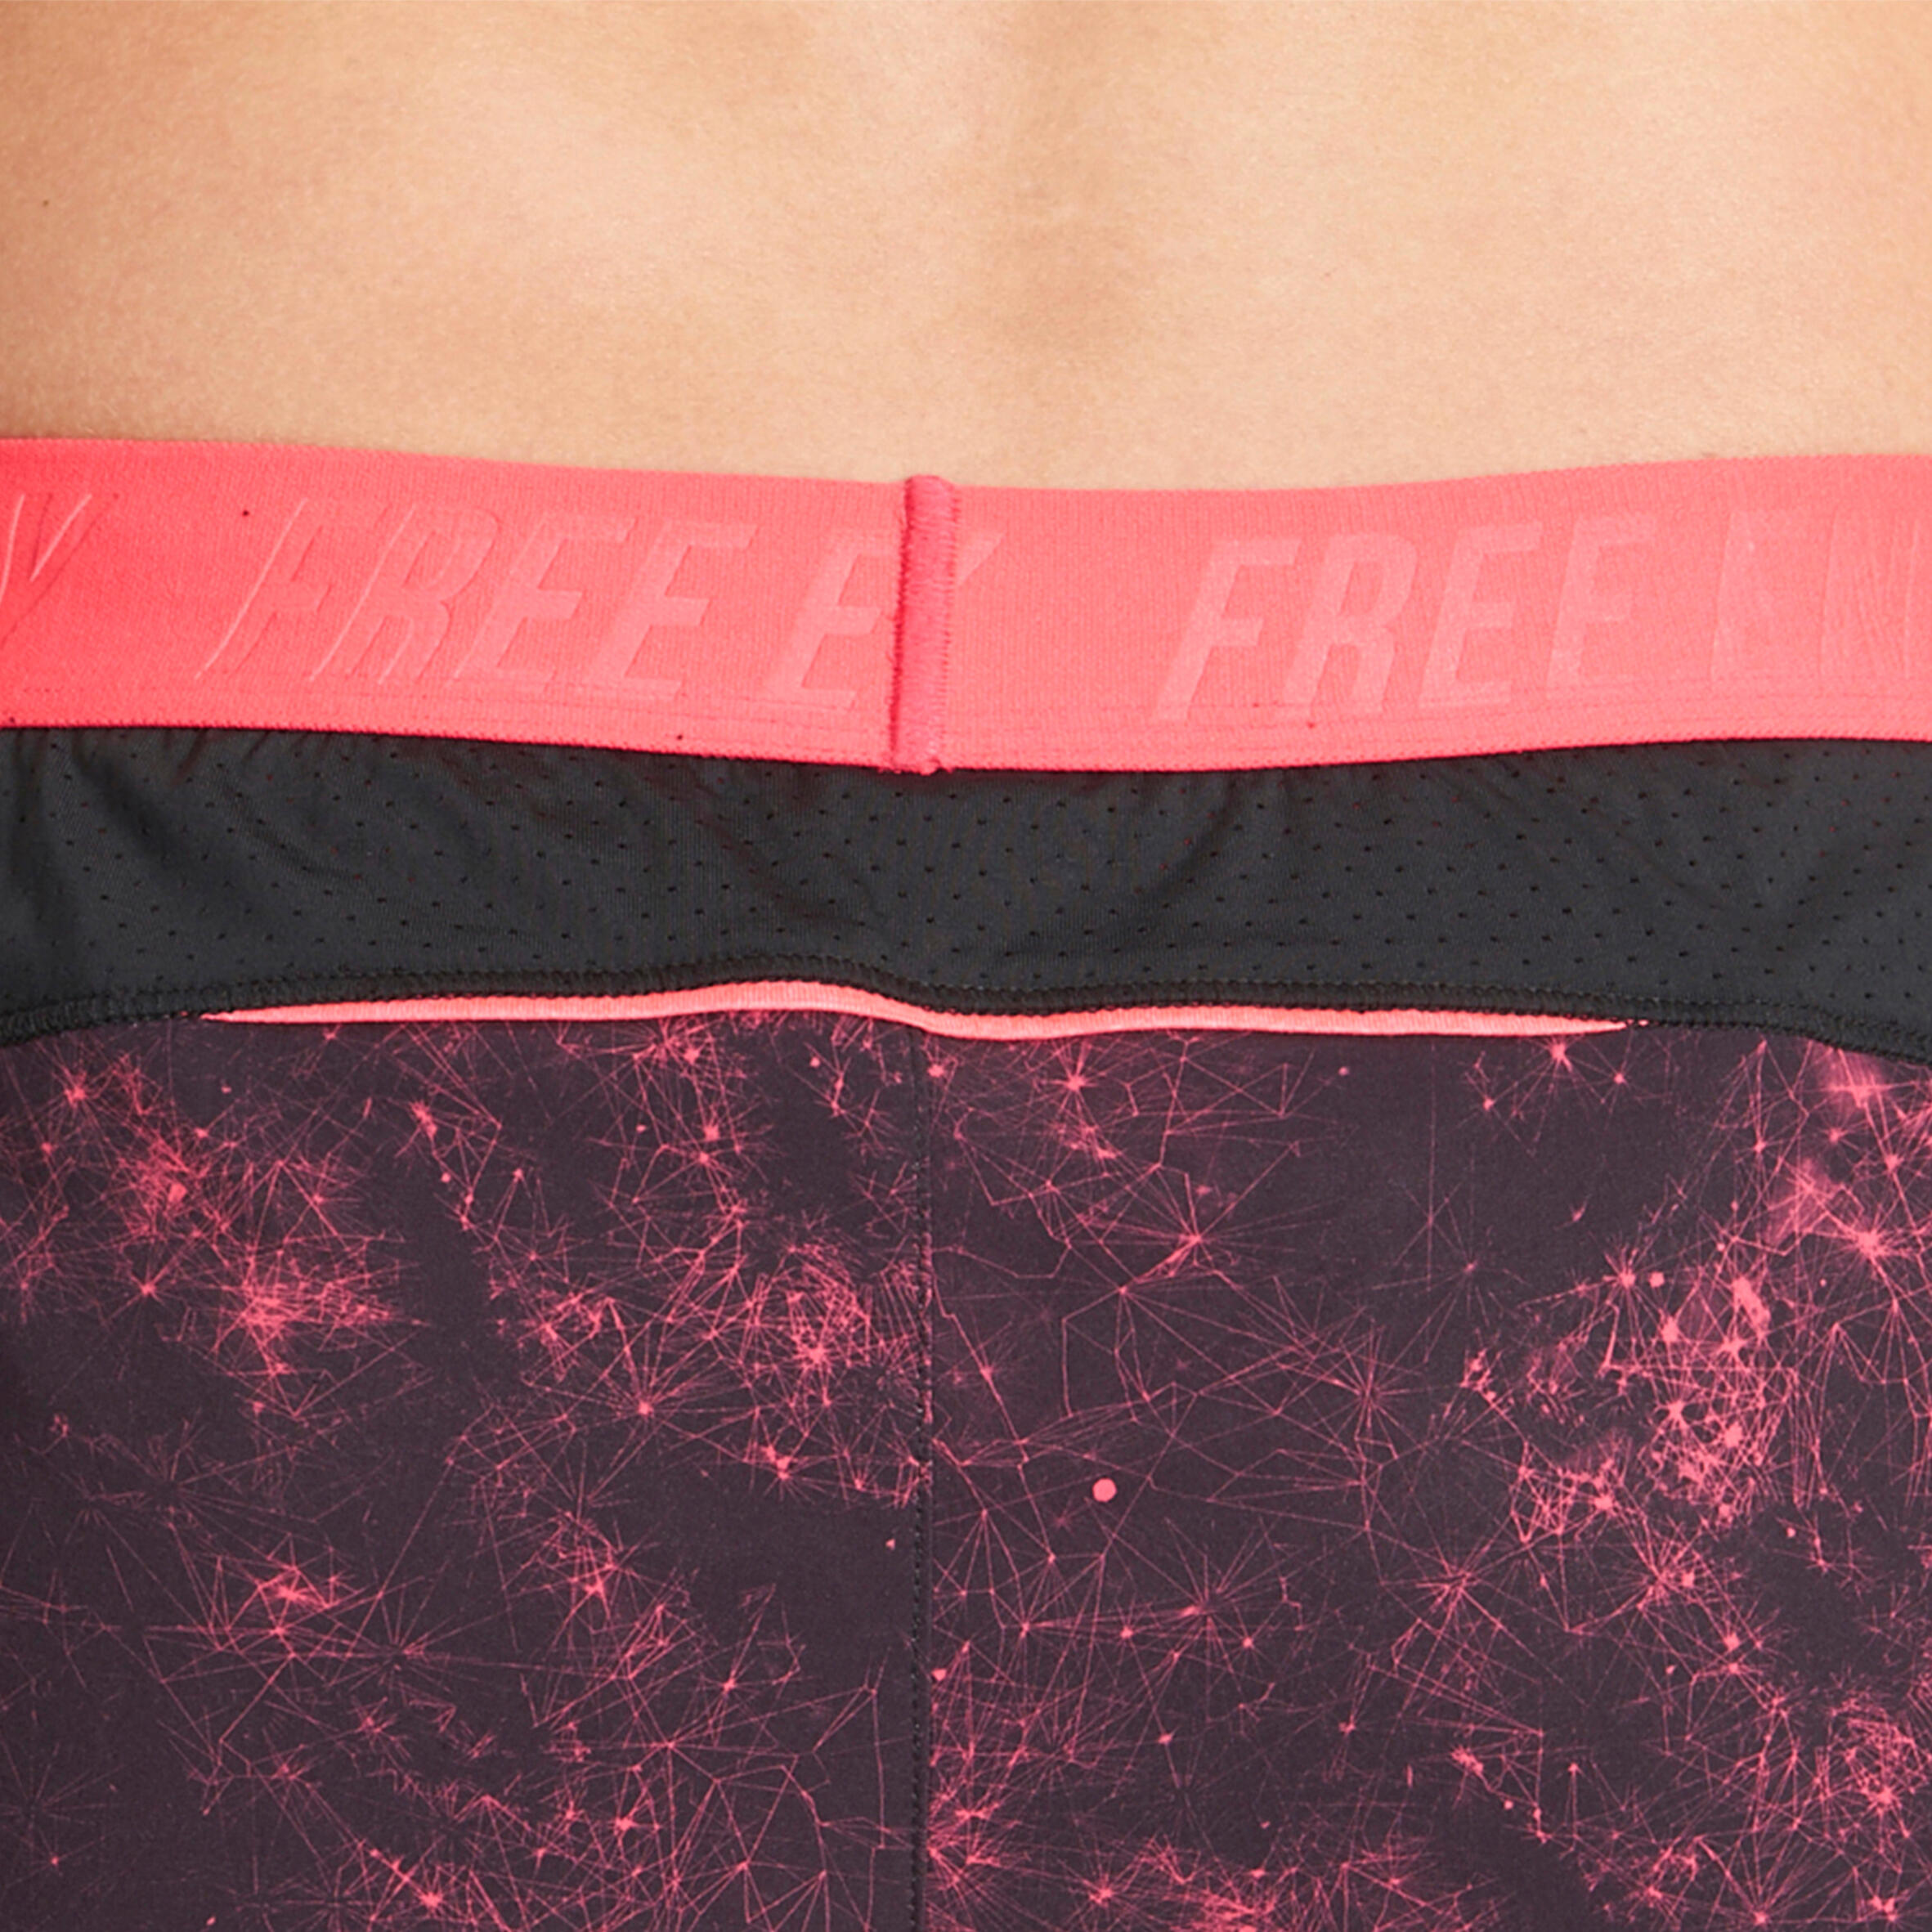 Energy Xtreme Women's 2-in-1 Fitness Shorts - Black/Pink Print 10/14